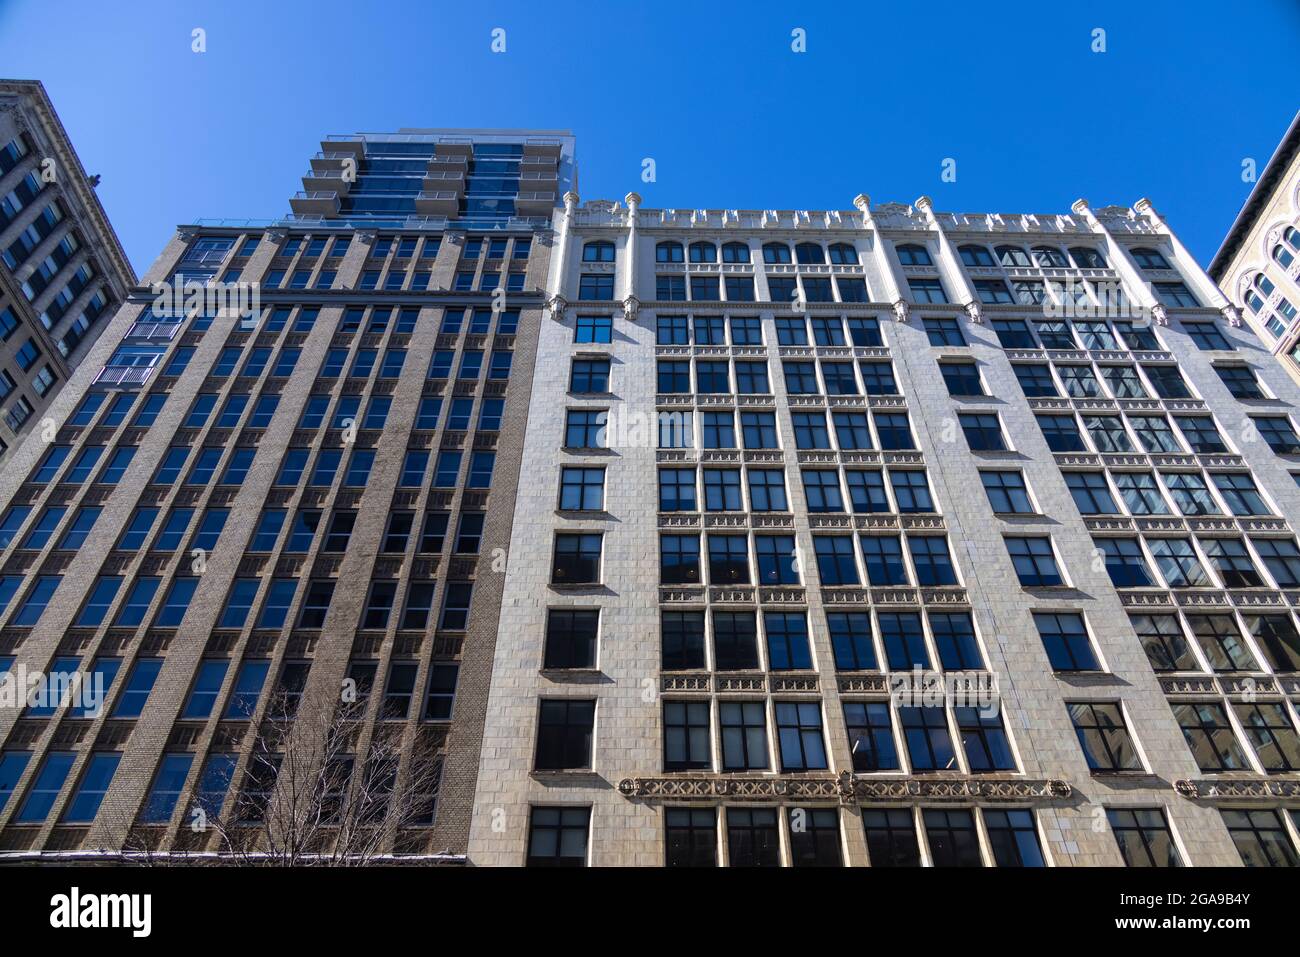 Row of buildings stands along Park Avenue South on February 24, 2021 in New York City NY USA. Stock Photo